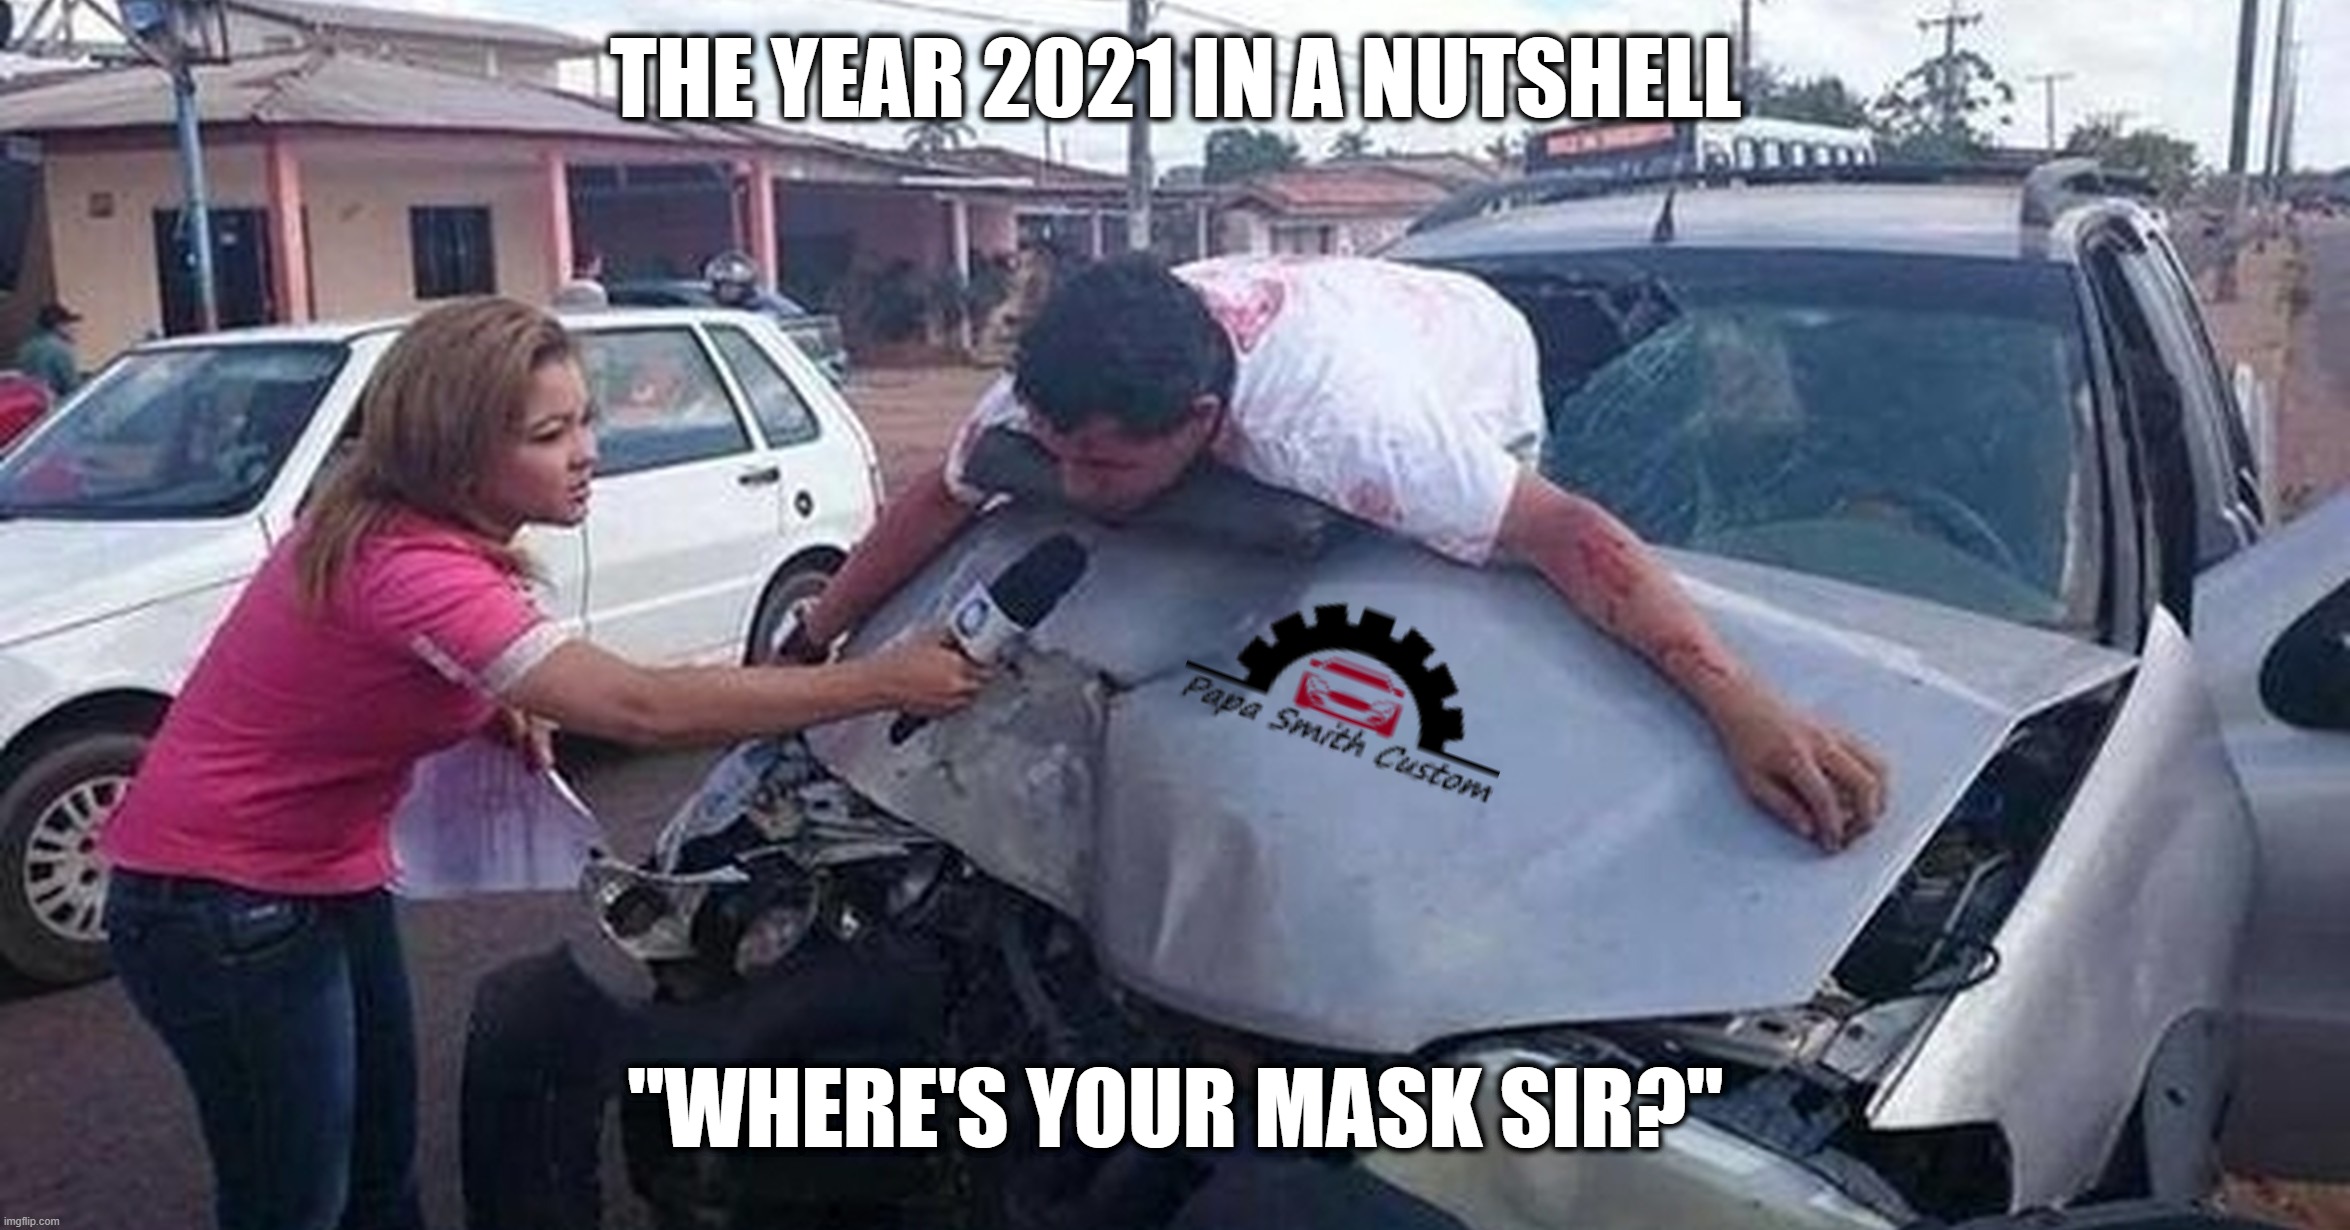 2021 in a nutshell |  THE YEAR 2021 IN A NUTSHELL; "WHERE'S YOUR MASK SIR?" | image tagged in government corruption,corruption,masks,2021,covid19 | made w/ Imgflip meme maker